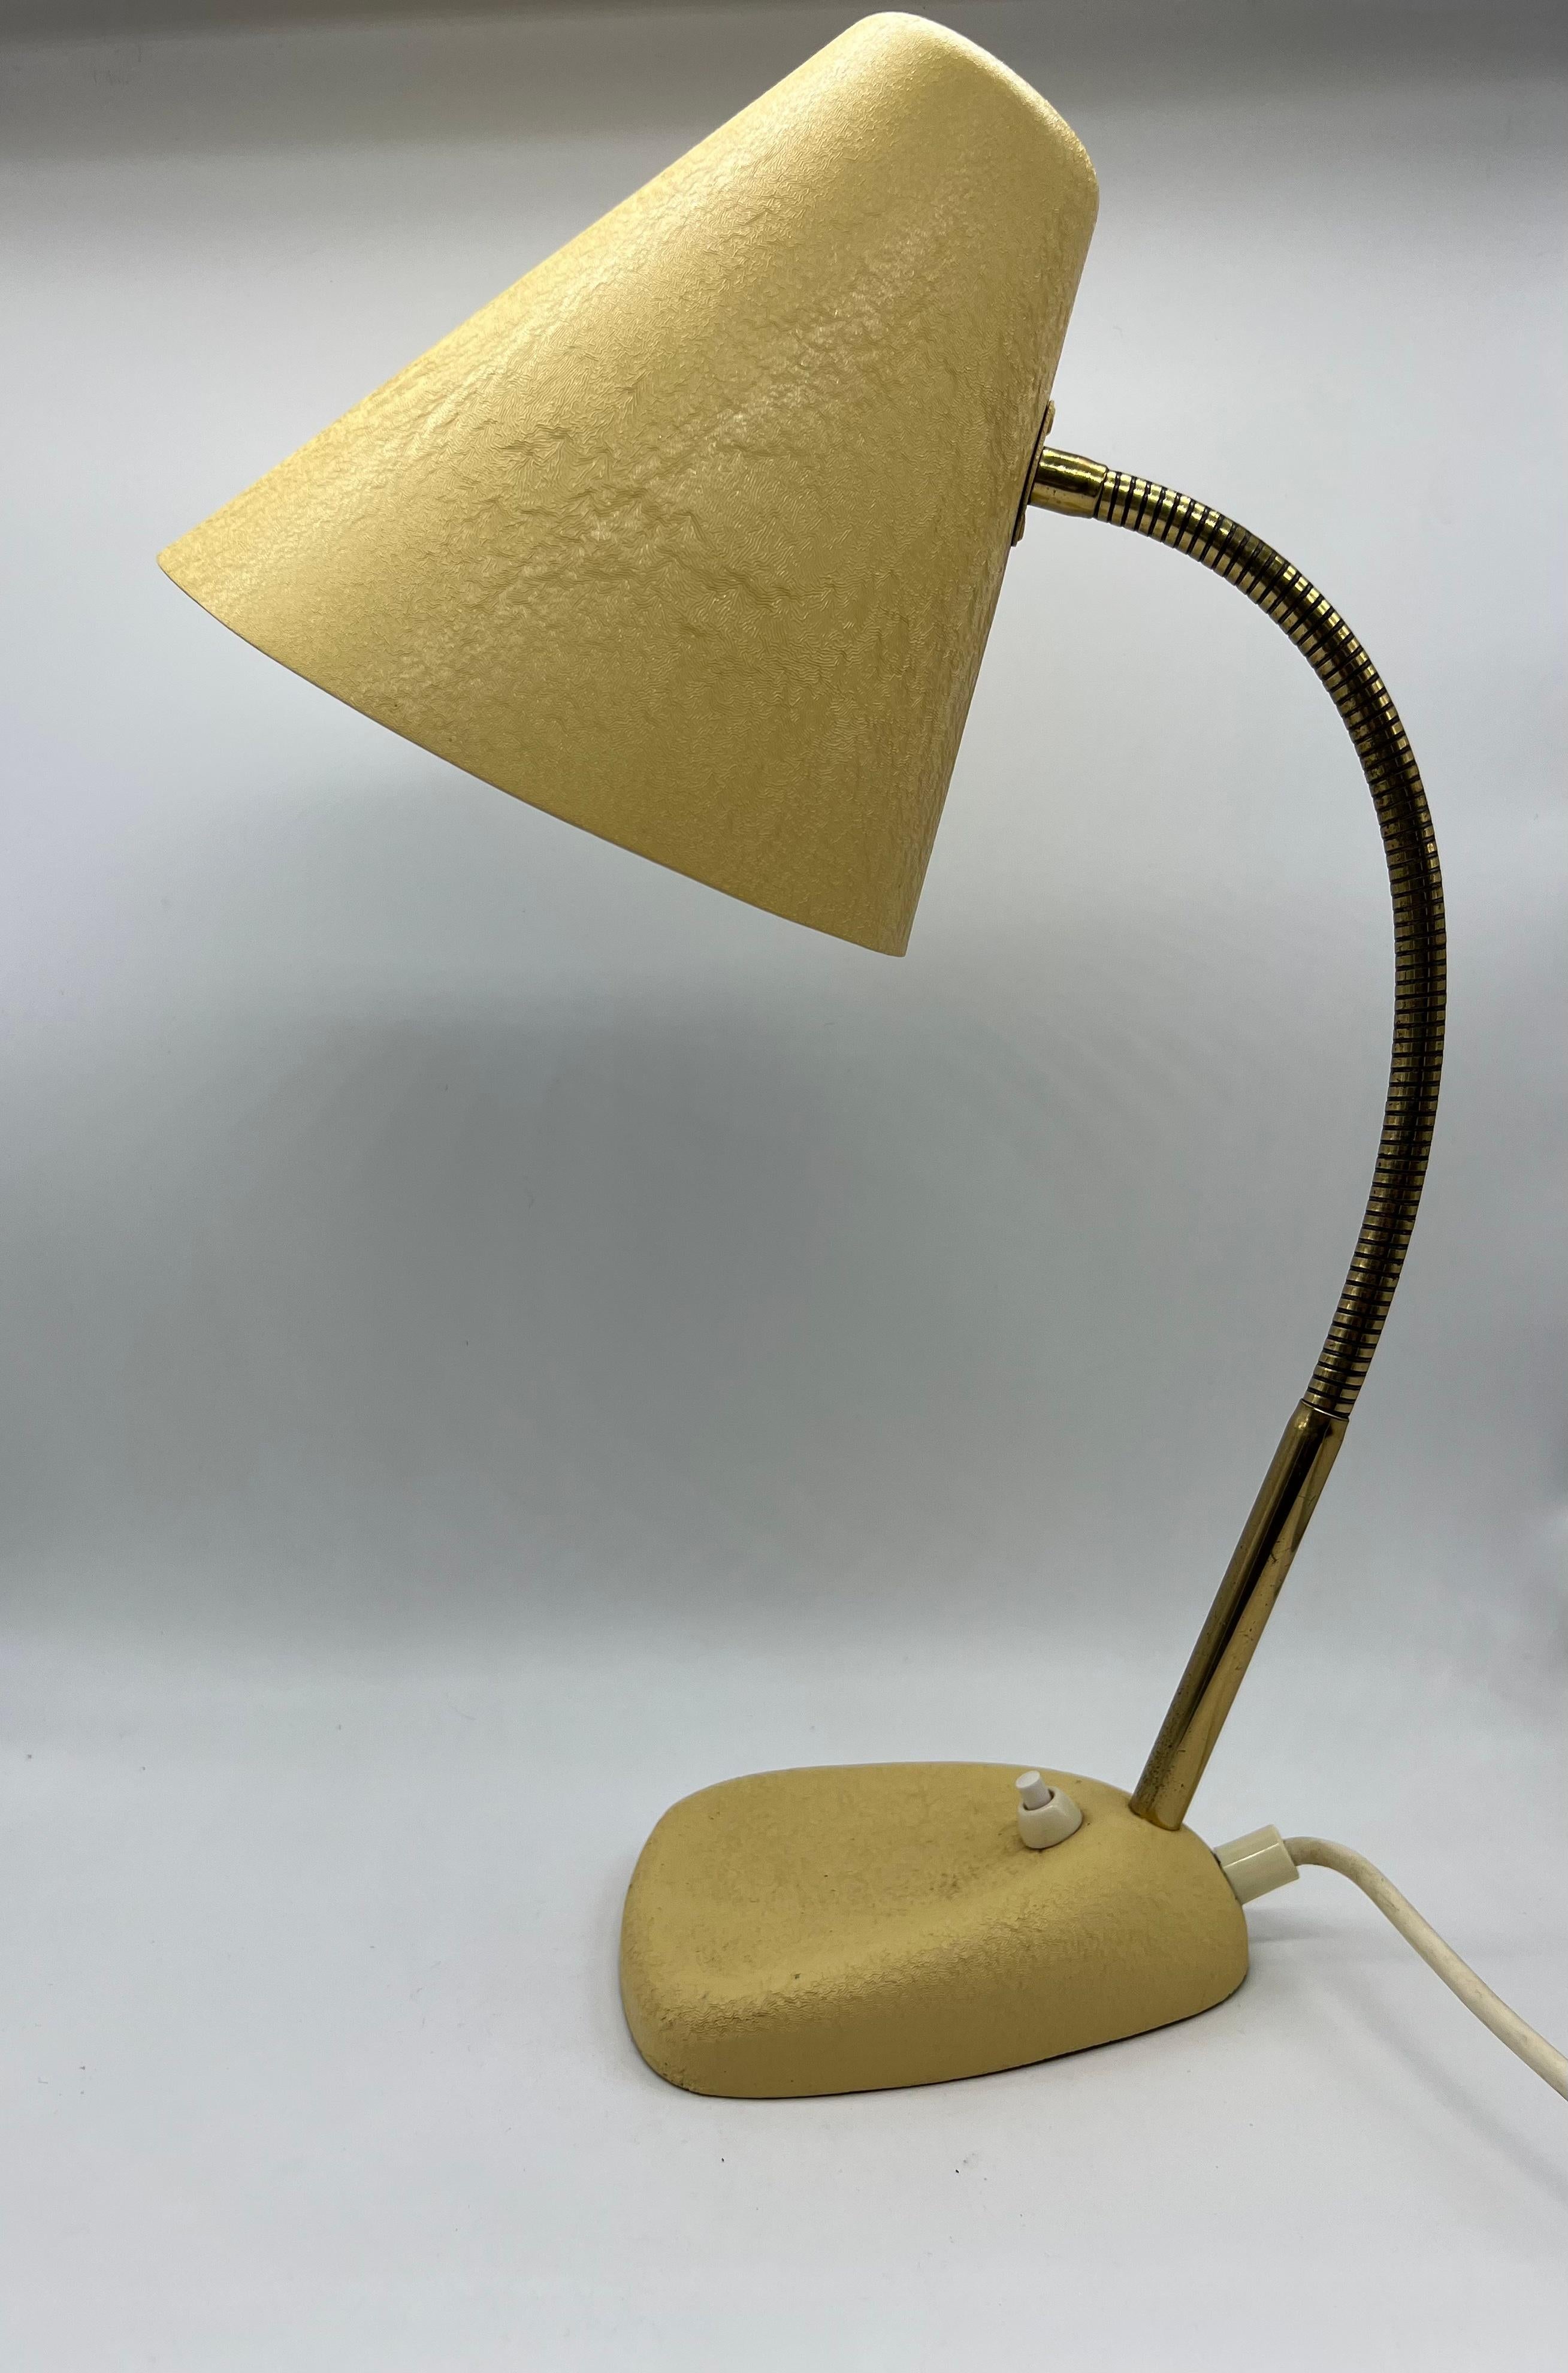 Yellow table lamp, with shrink varnish and movable shade, Modern, mid-20th century, good condition.

 